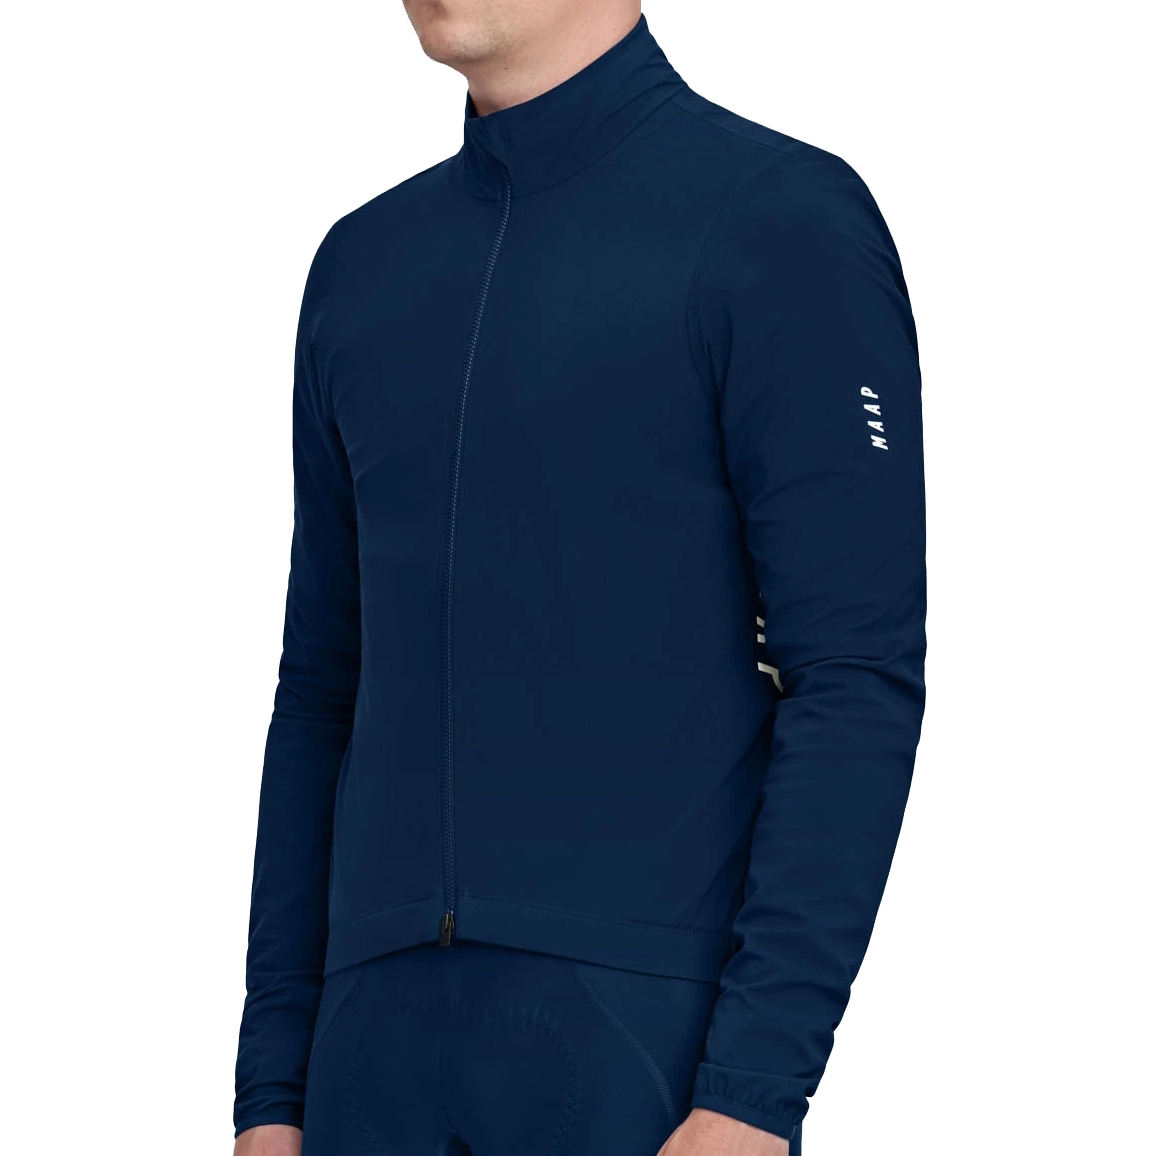 Image of MAAP Prime Stow Jacket - navy